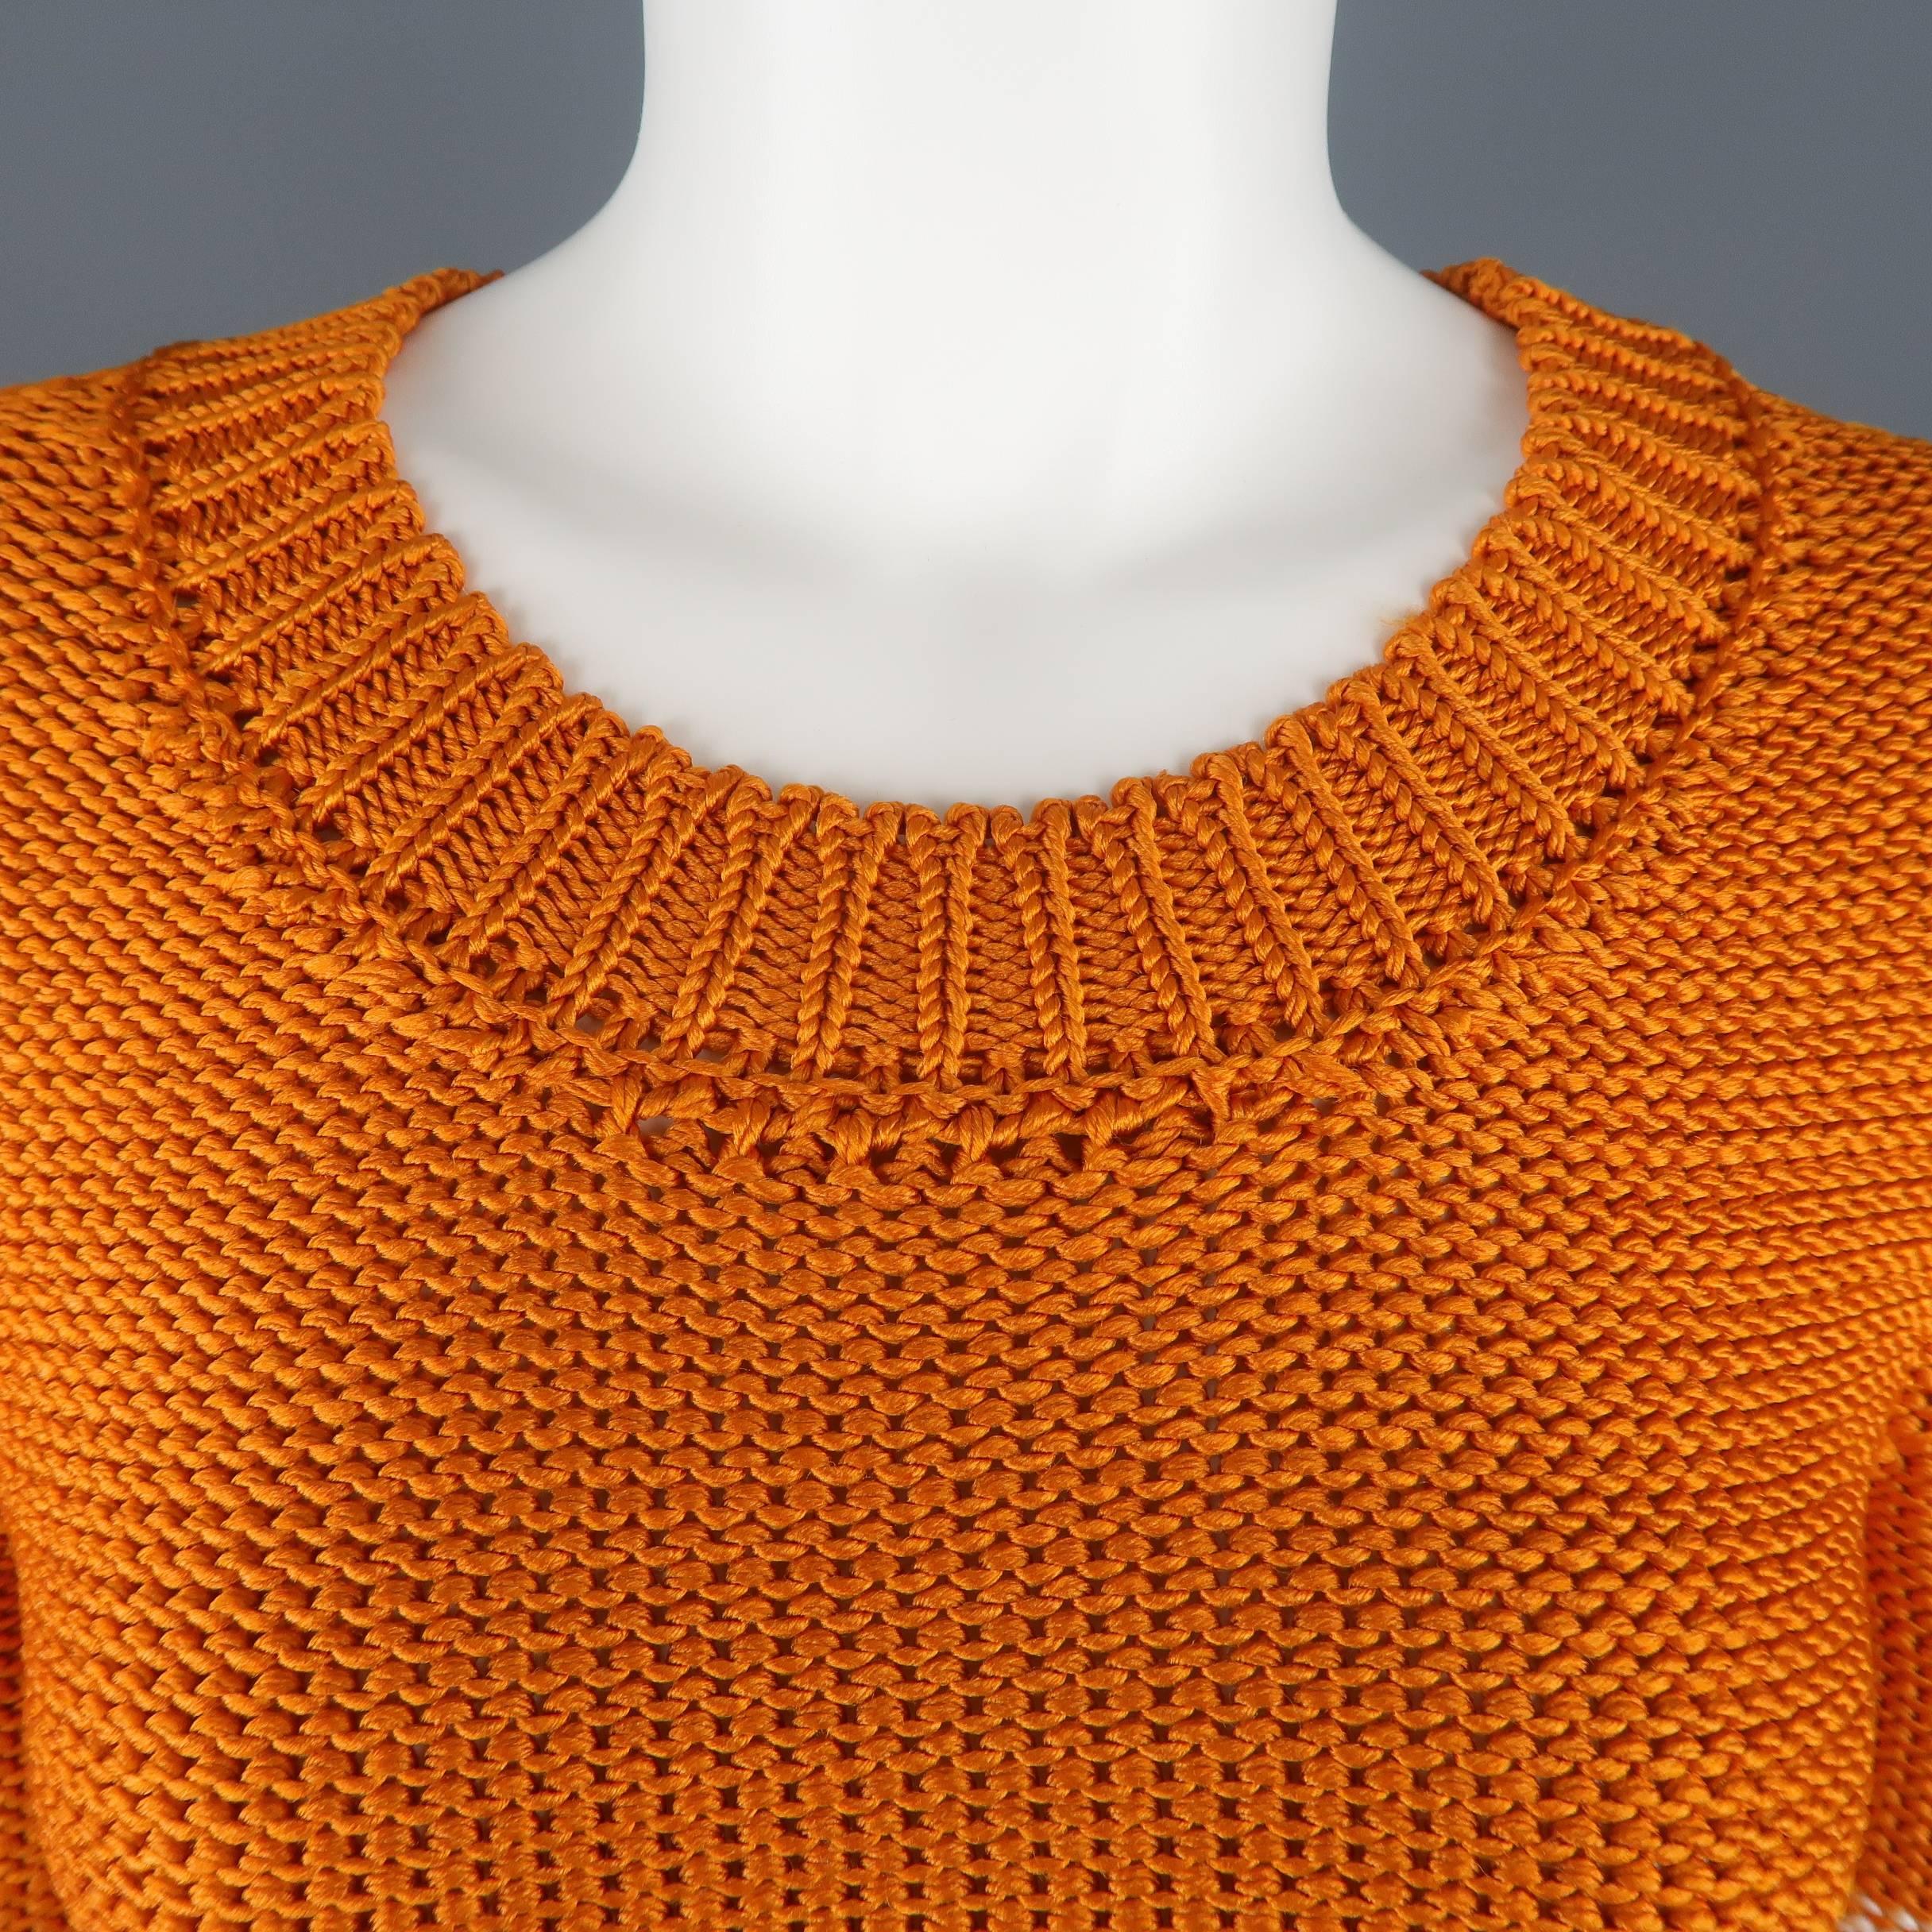 OSCAR DE LA RENTA pullover sweater comes in an orange silk knit with cream stripes with a round crewneck and three quarter sleeves. Made in France.

Retail: $1500
Excellent Pre-Owned Condition.
Marked: M
 
Measurements:
 
Shoulder: 13 in.
Bust: 36